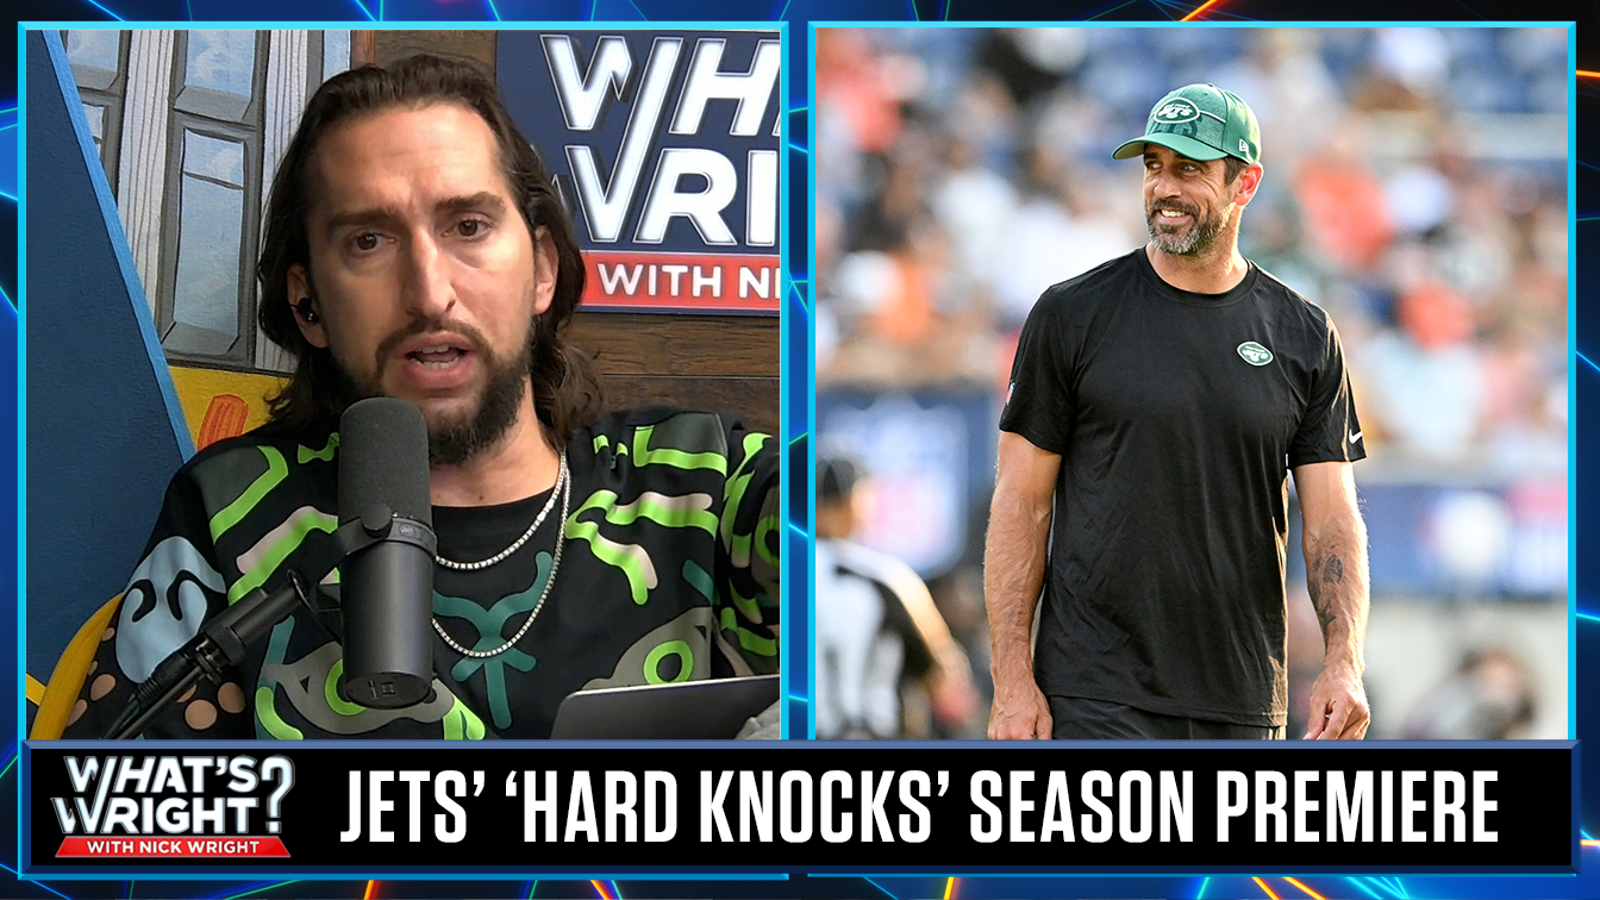 Aaron Rodgers, Jets make their 'Hard Knocks' debut